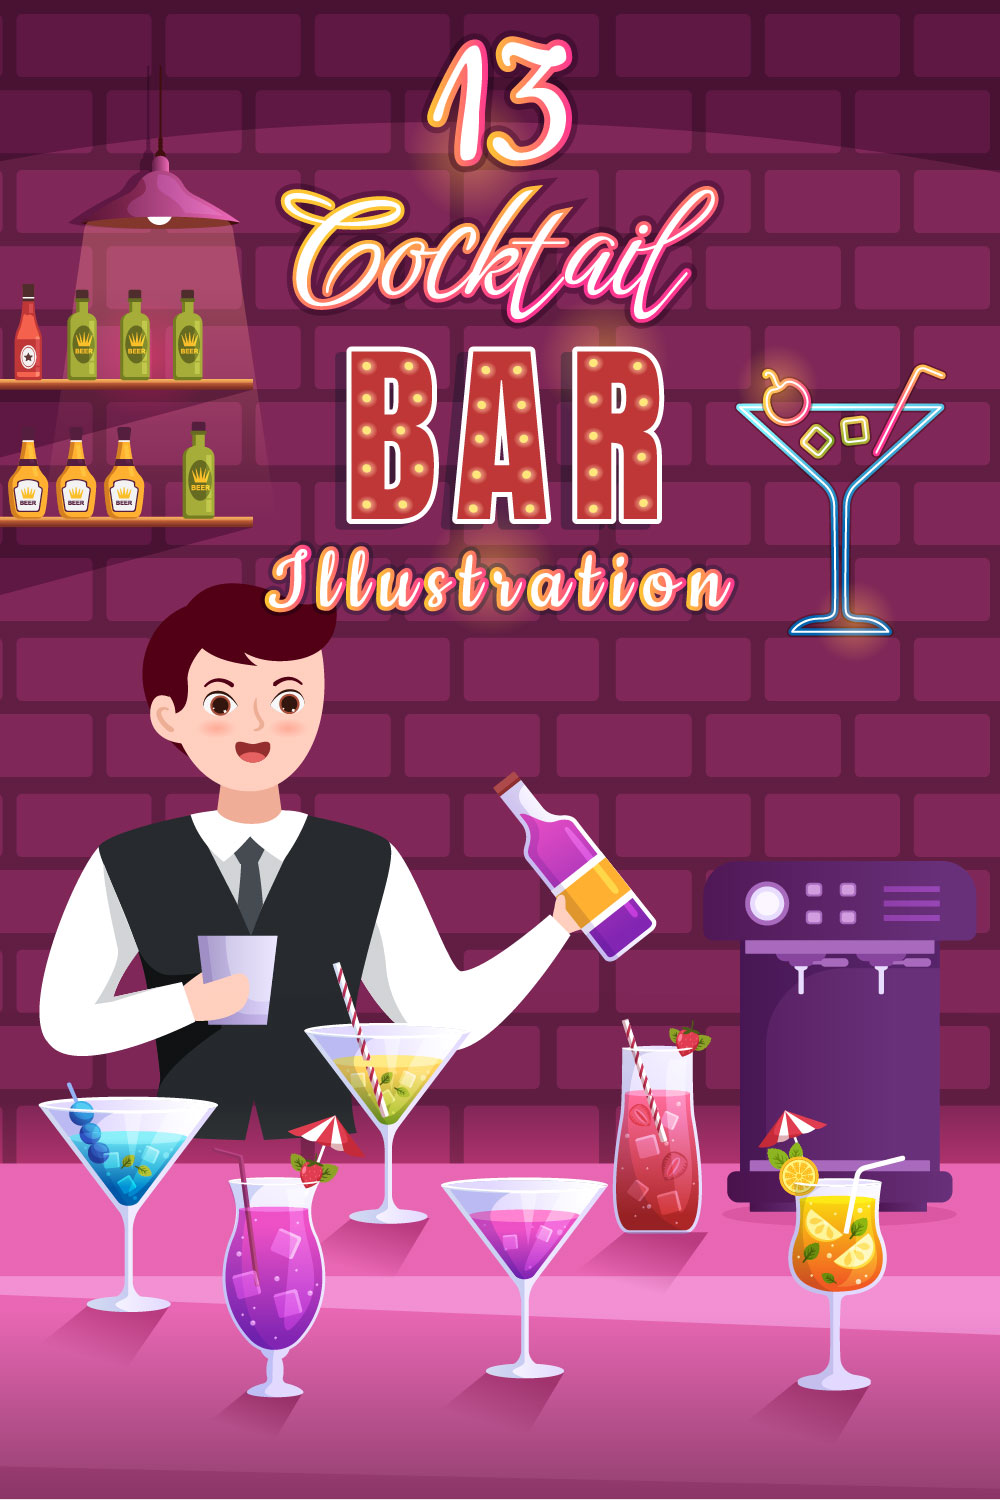 Exquisite cartoon image of a night cocktail bar.